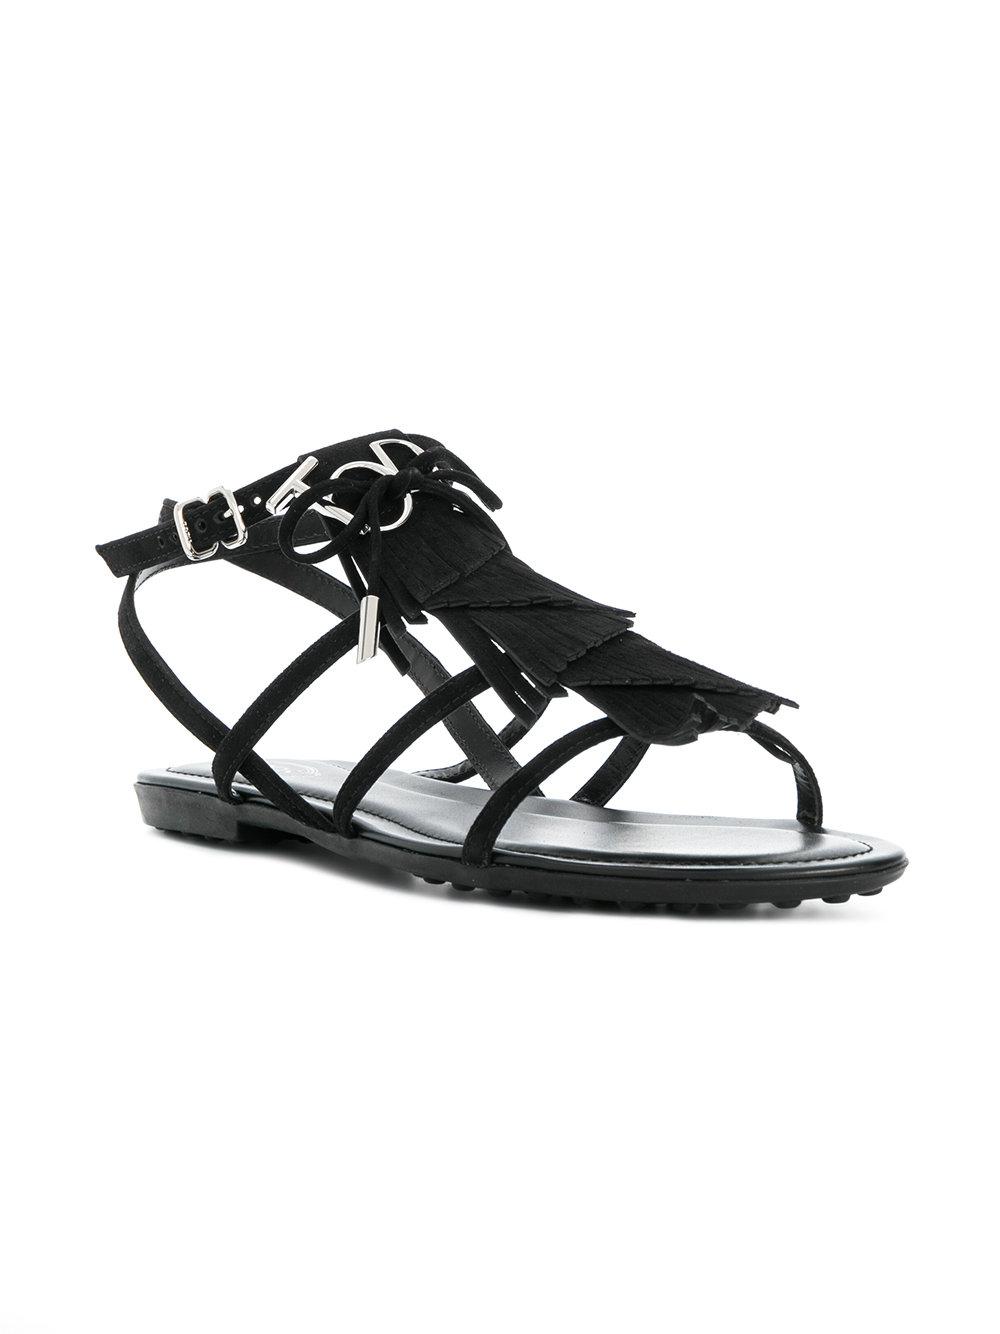 Tod's Leather Sandals in Black | Lyst